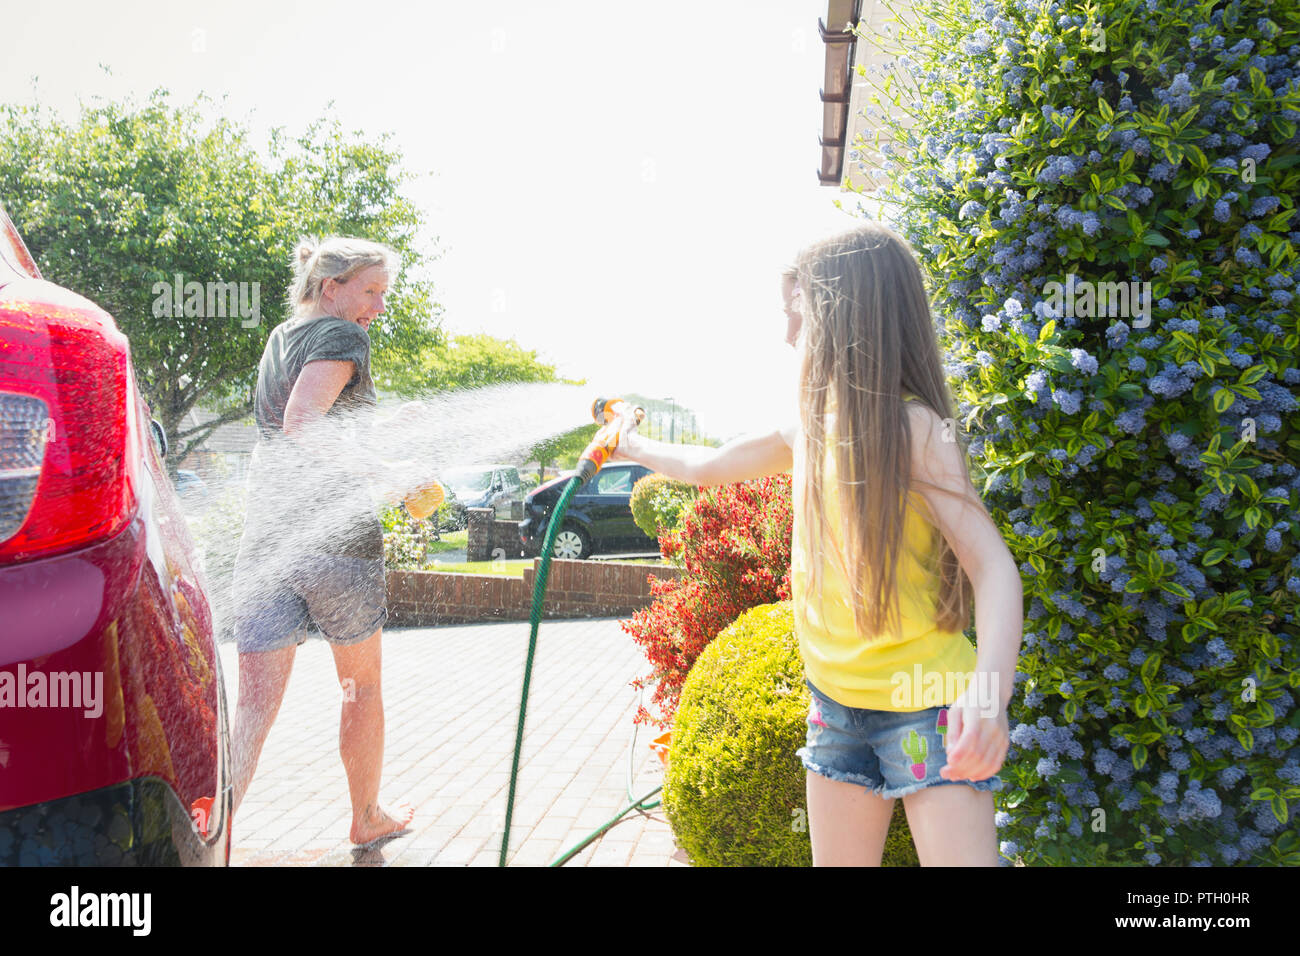 Playful daughter spraying mother with hose in sunny driveway Stock Photo